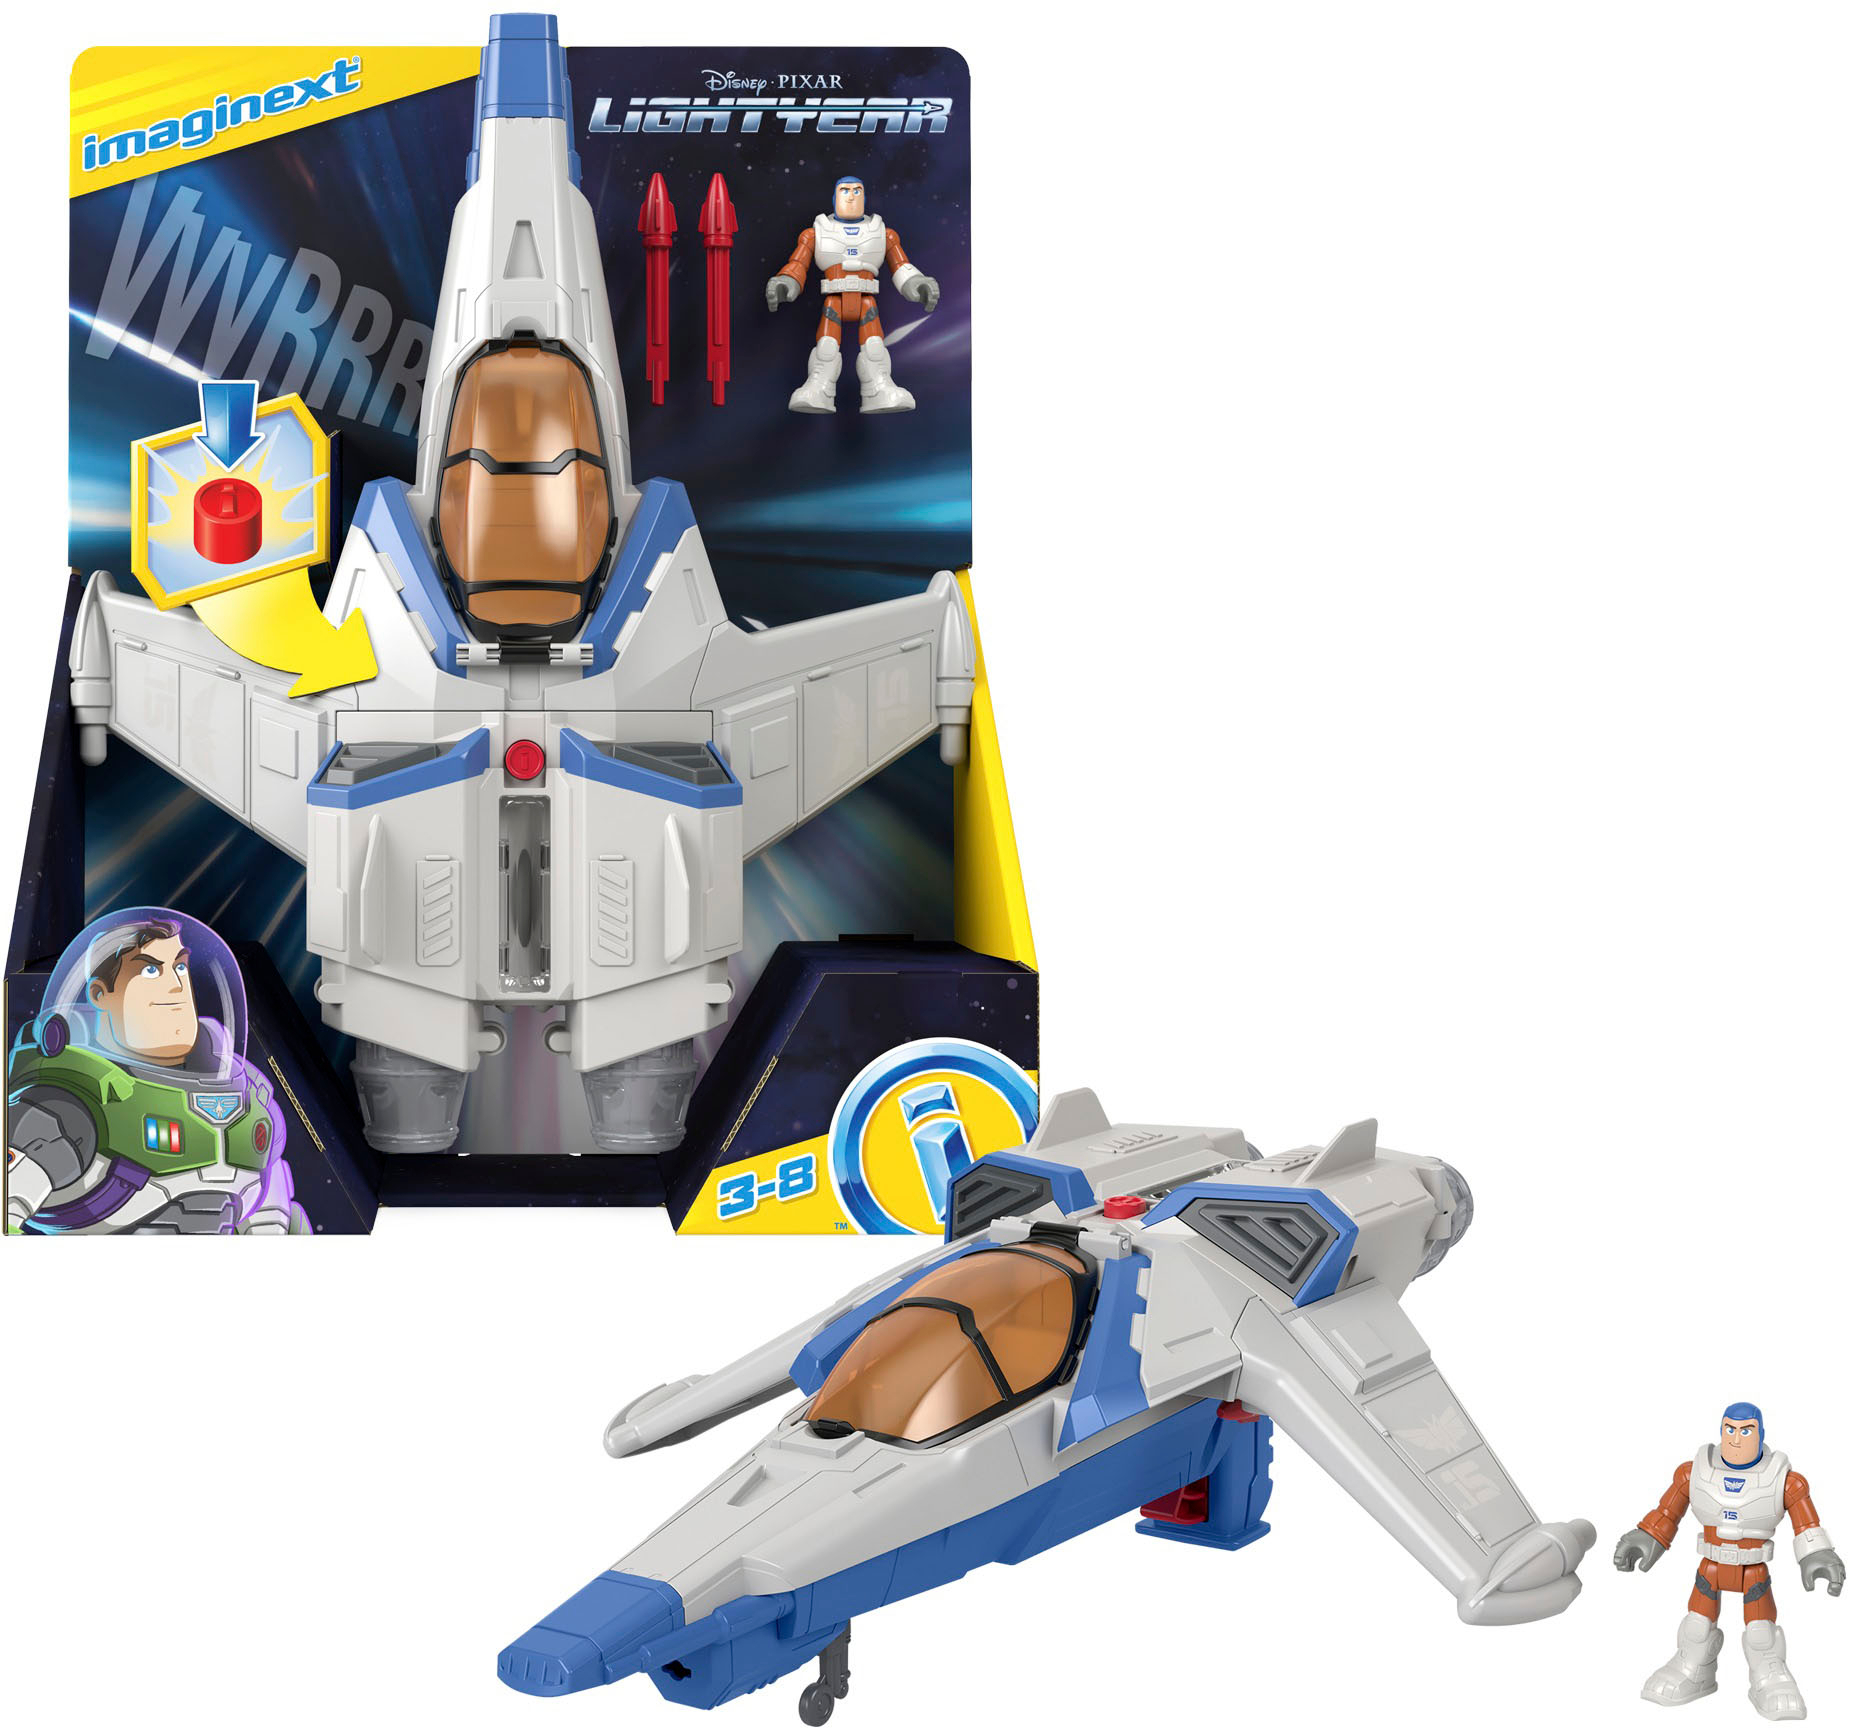 Imaginext Lights & Sounds XL-15 Spaceship and Buzz Lightyear Gray/Blue  HGT26 - Best Buy